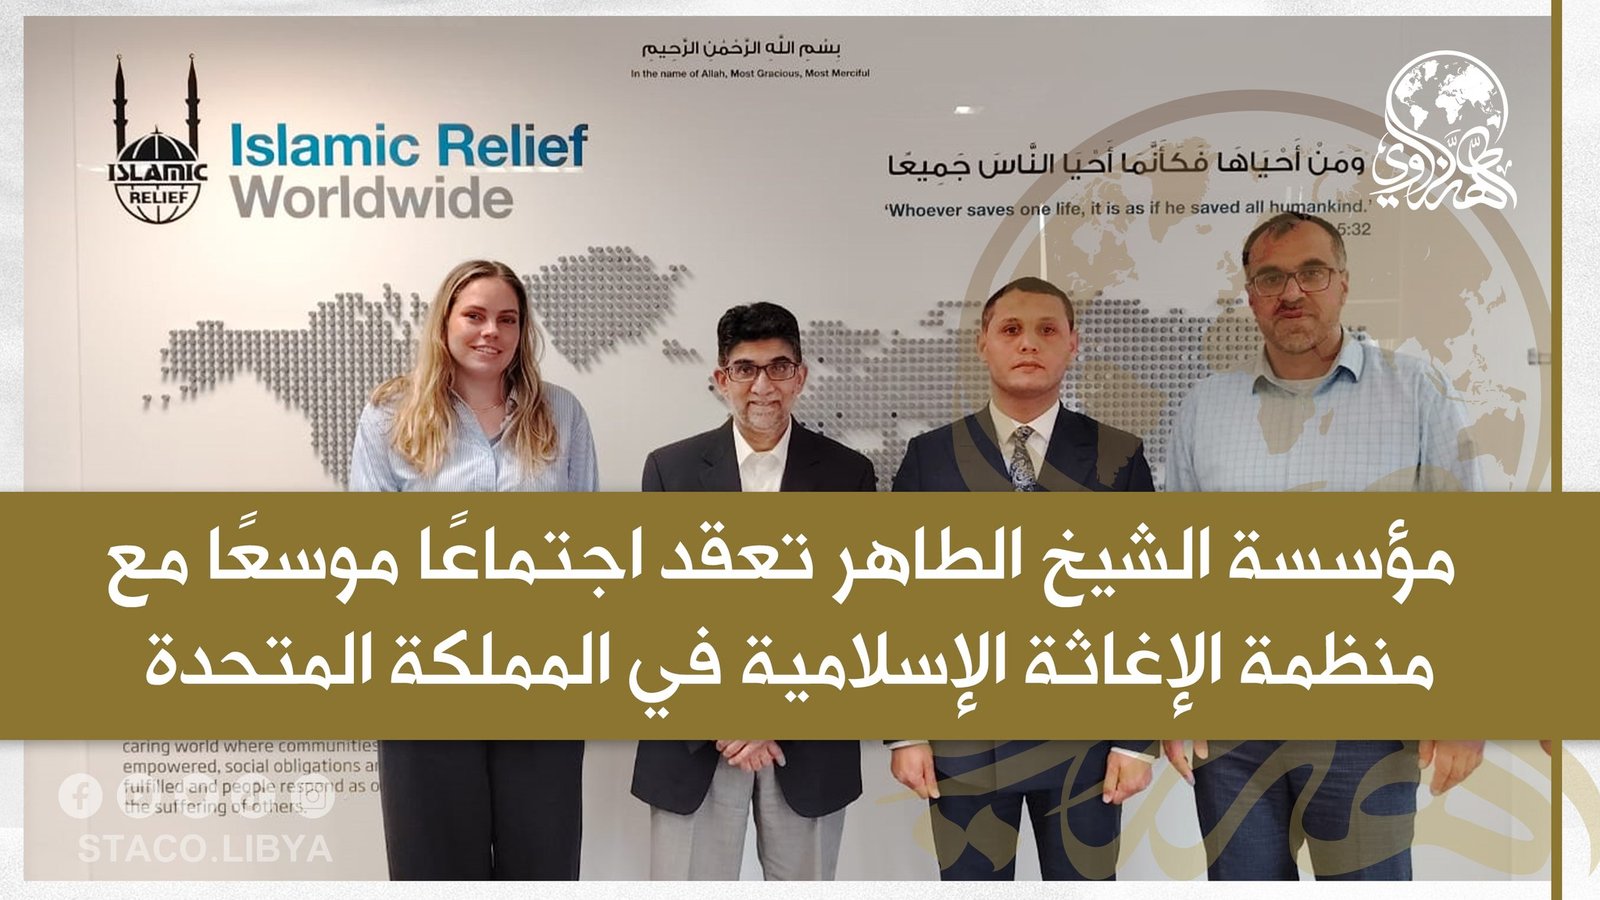 The Sheikh Tahir organization holds an expanded meeting with the Islamic Relief Organization in the United Kingdom